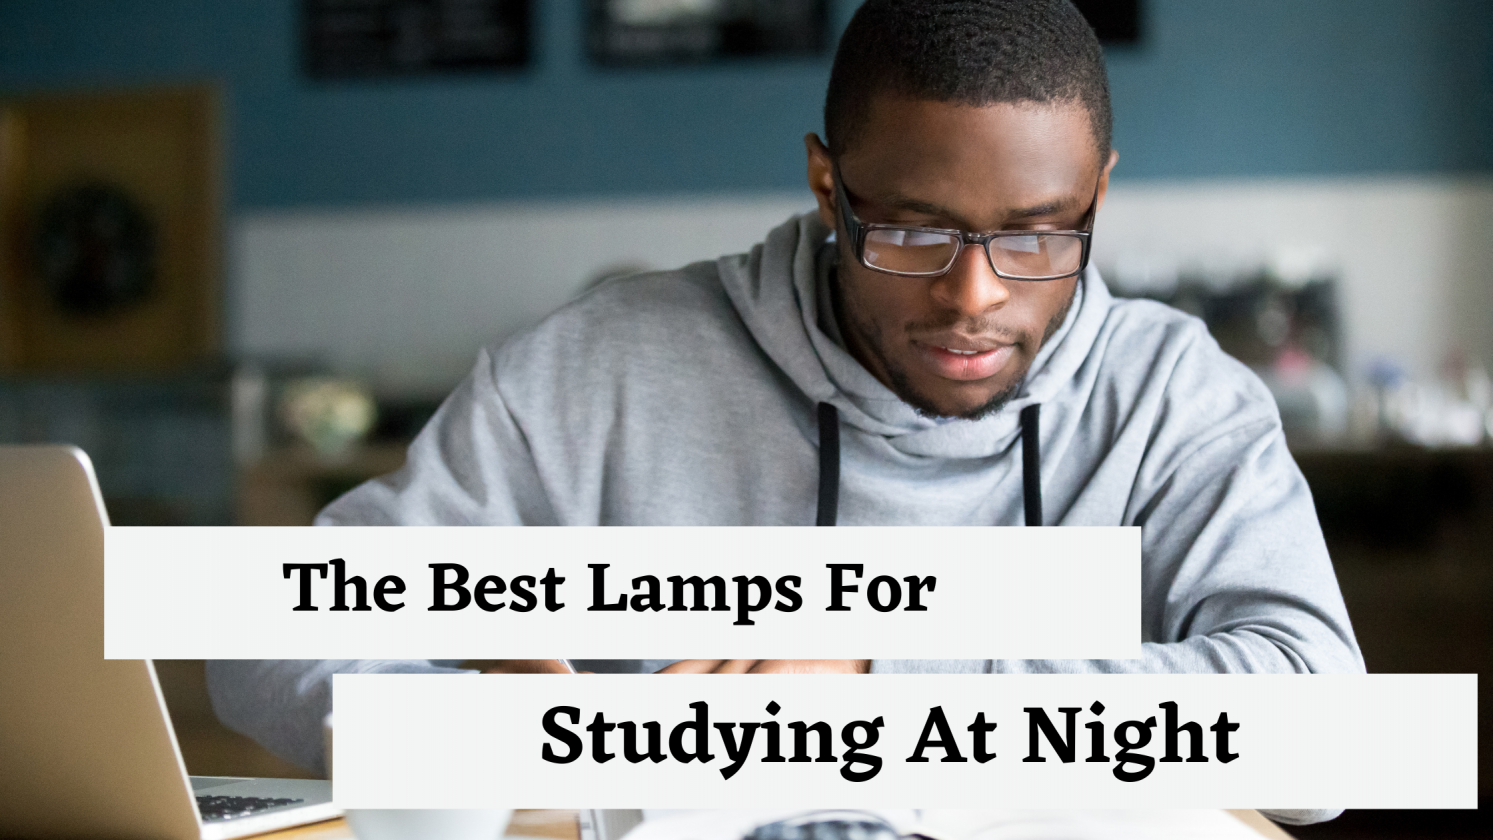 The Best Lamps For Studying At Night